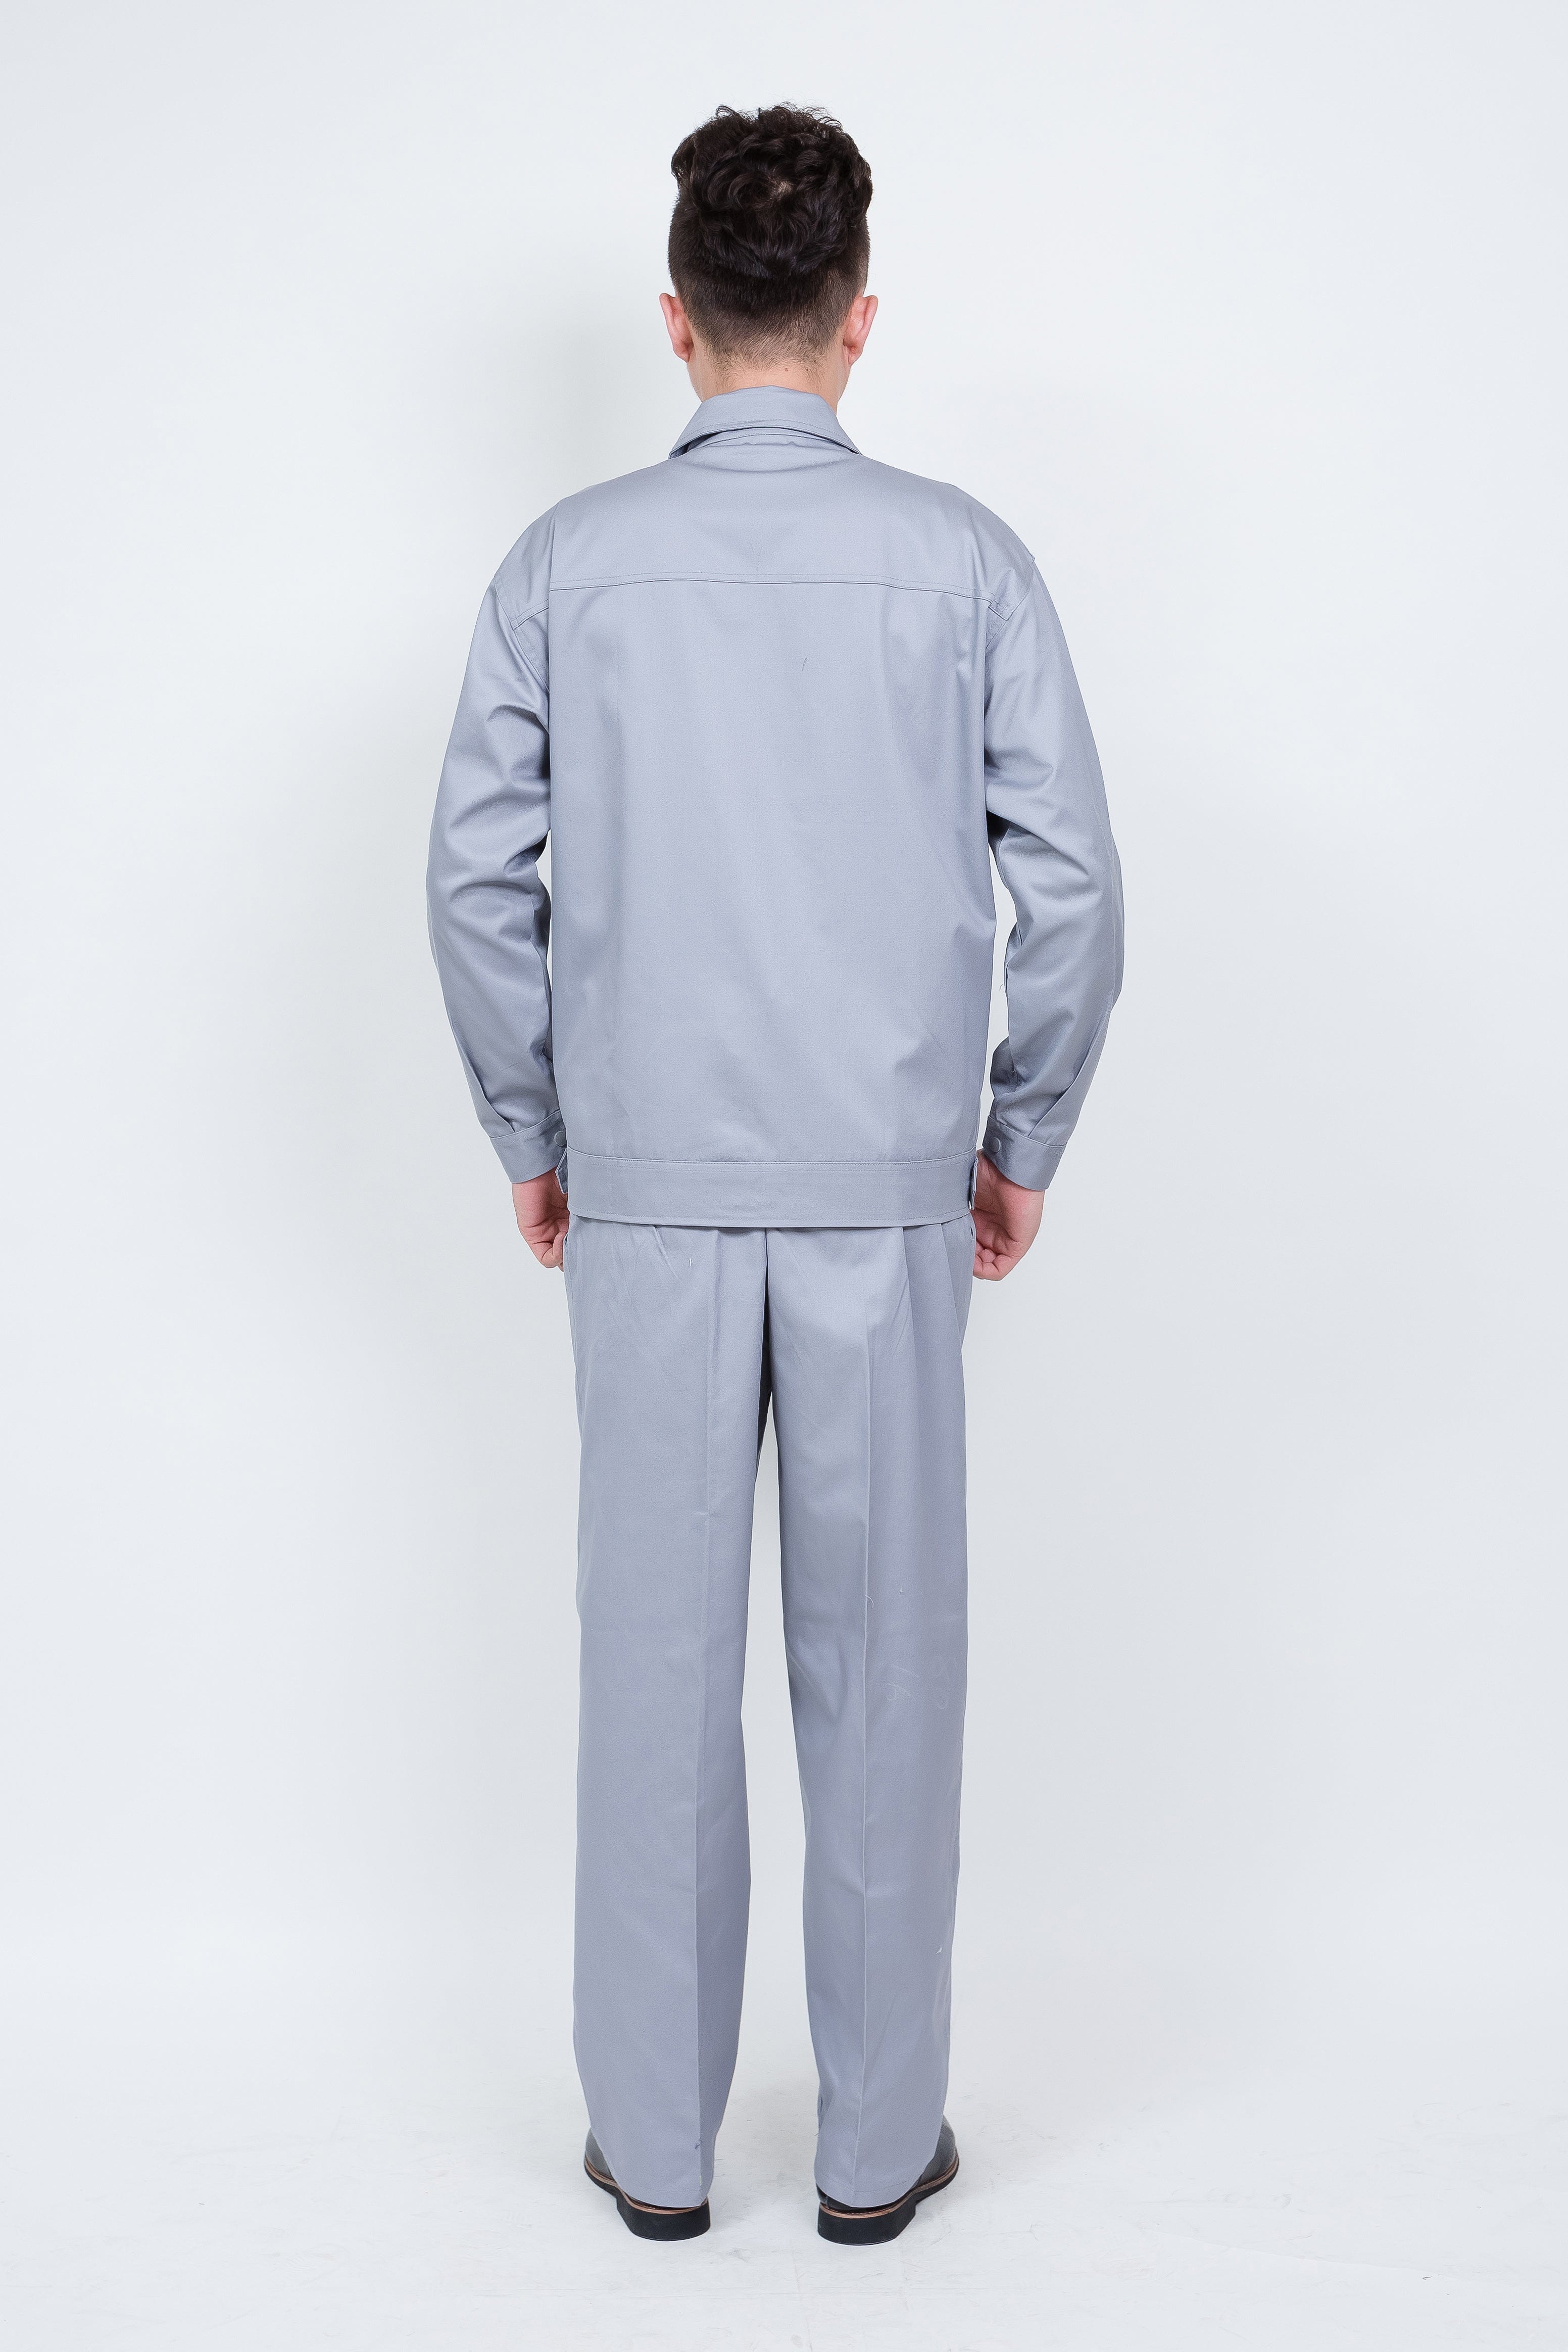 Corals Trading Co. 可樂思百貨商行 纯棉 Spring and Autumn style long-sleeved anti-static work clothes series SD-AS-W703